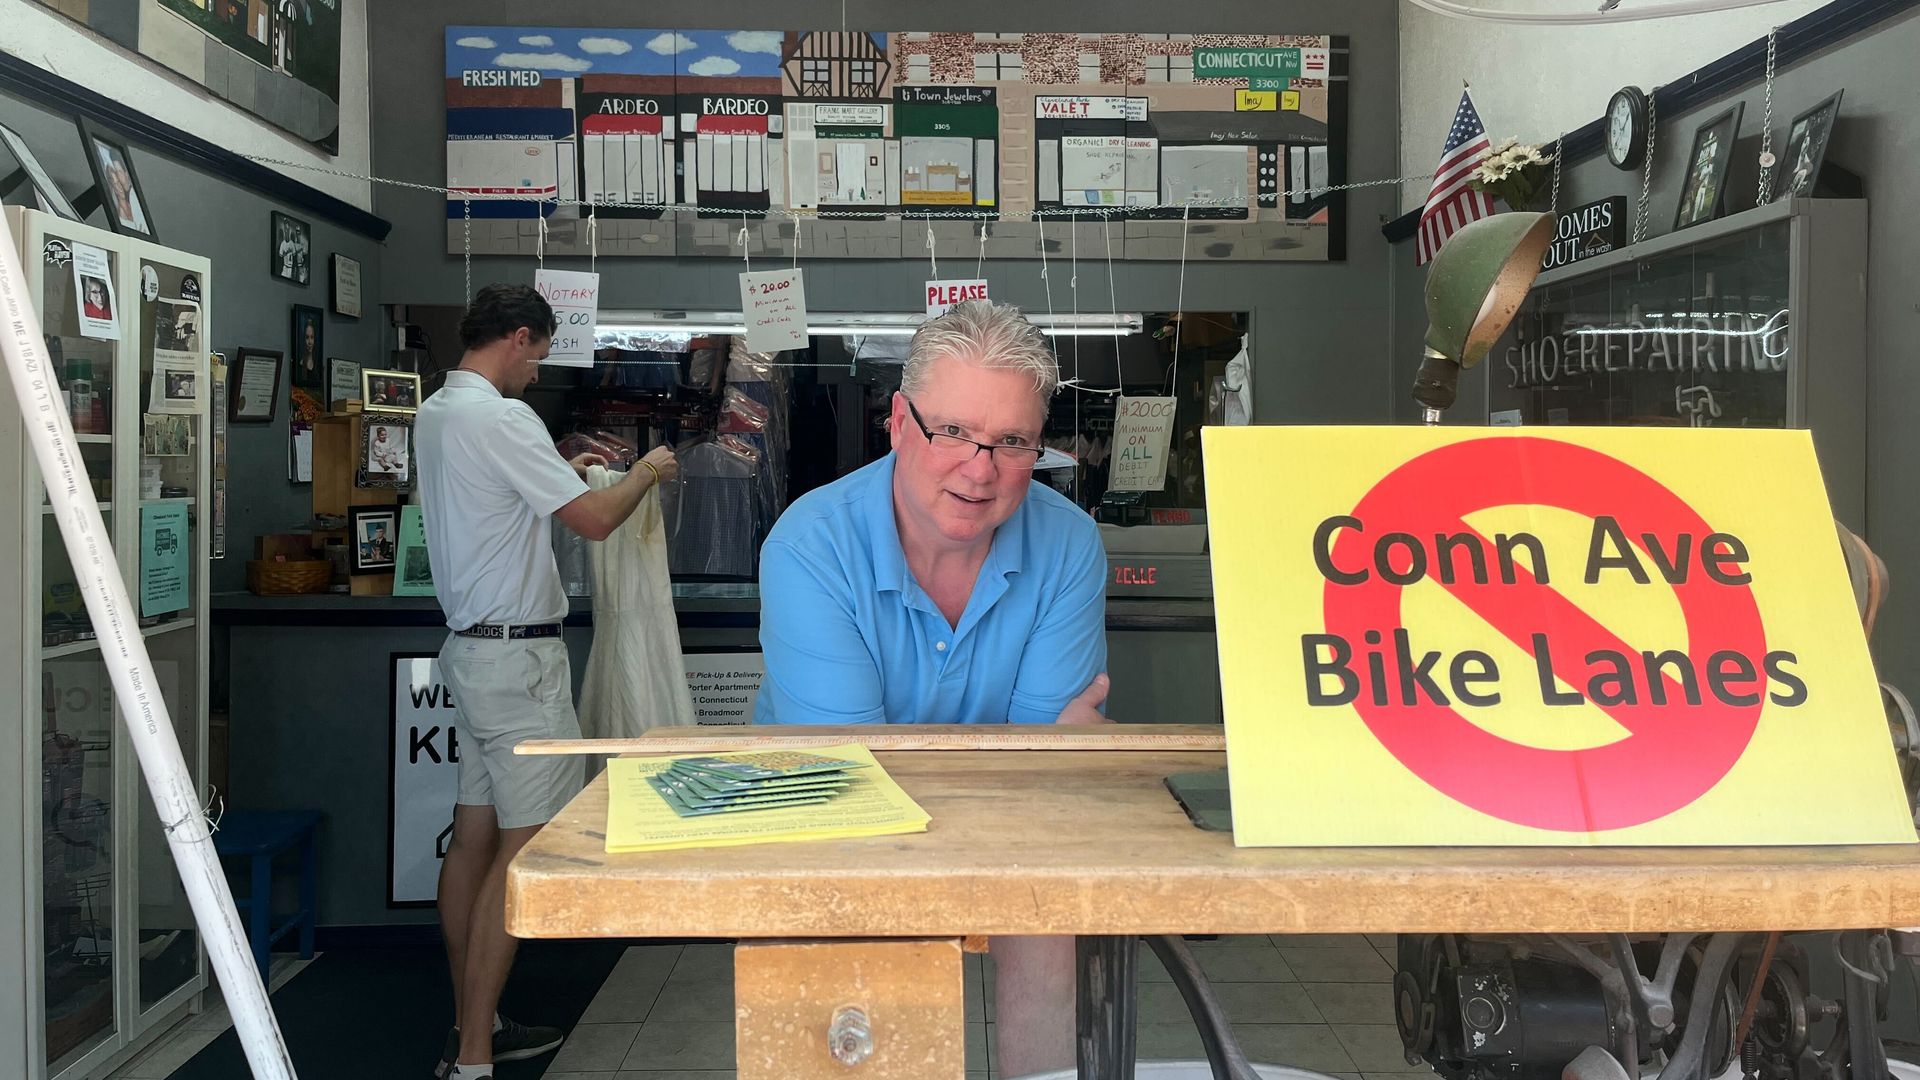 Dry cleaner shop owner poses next to anti "Conn Ave Bike Lanes" sign on storefront